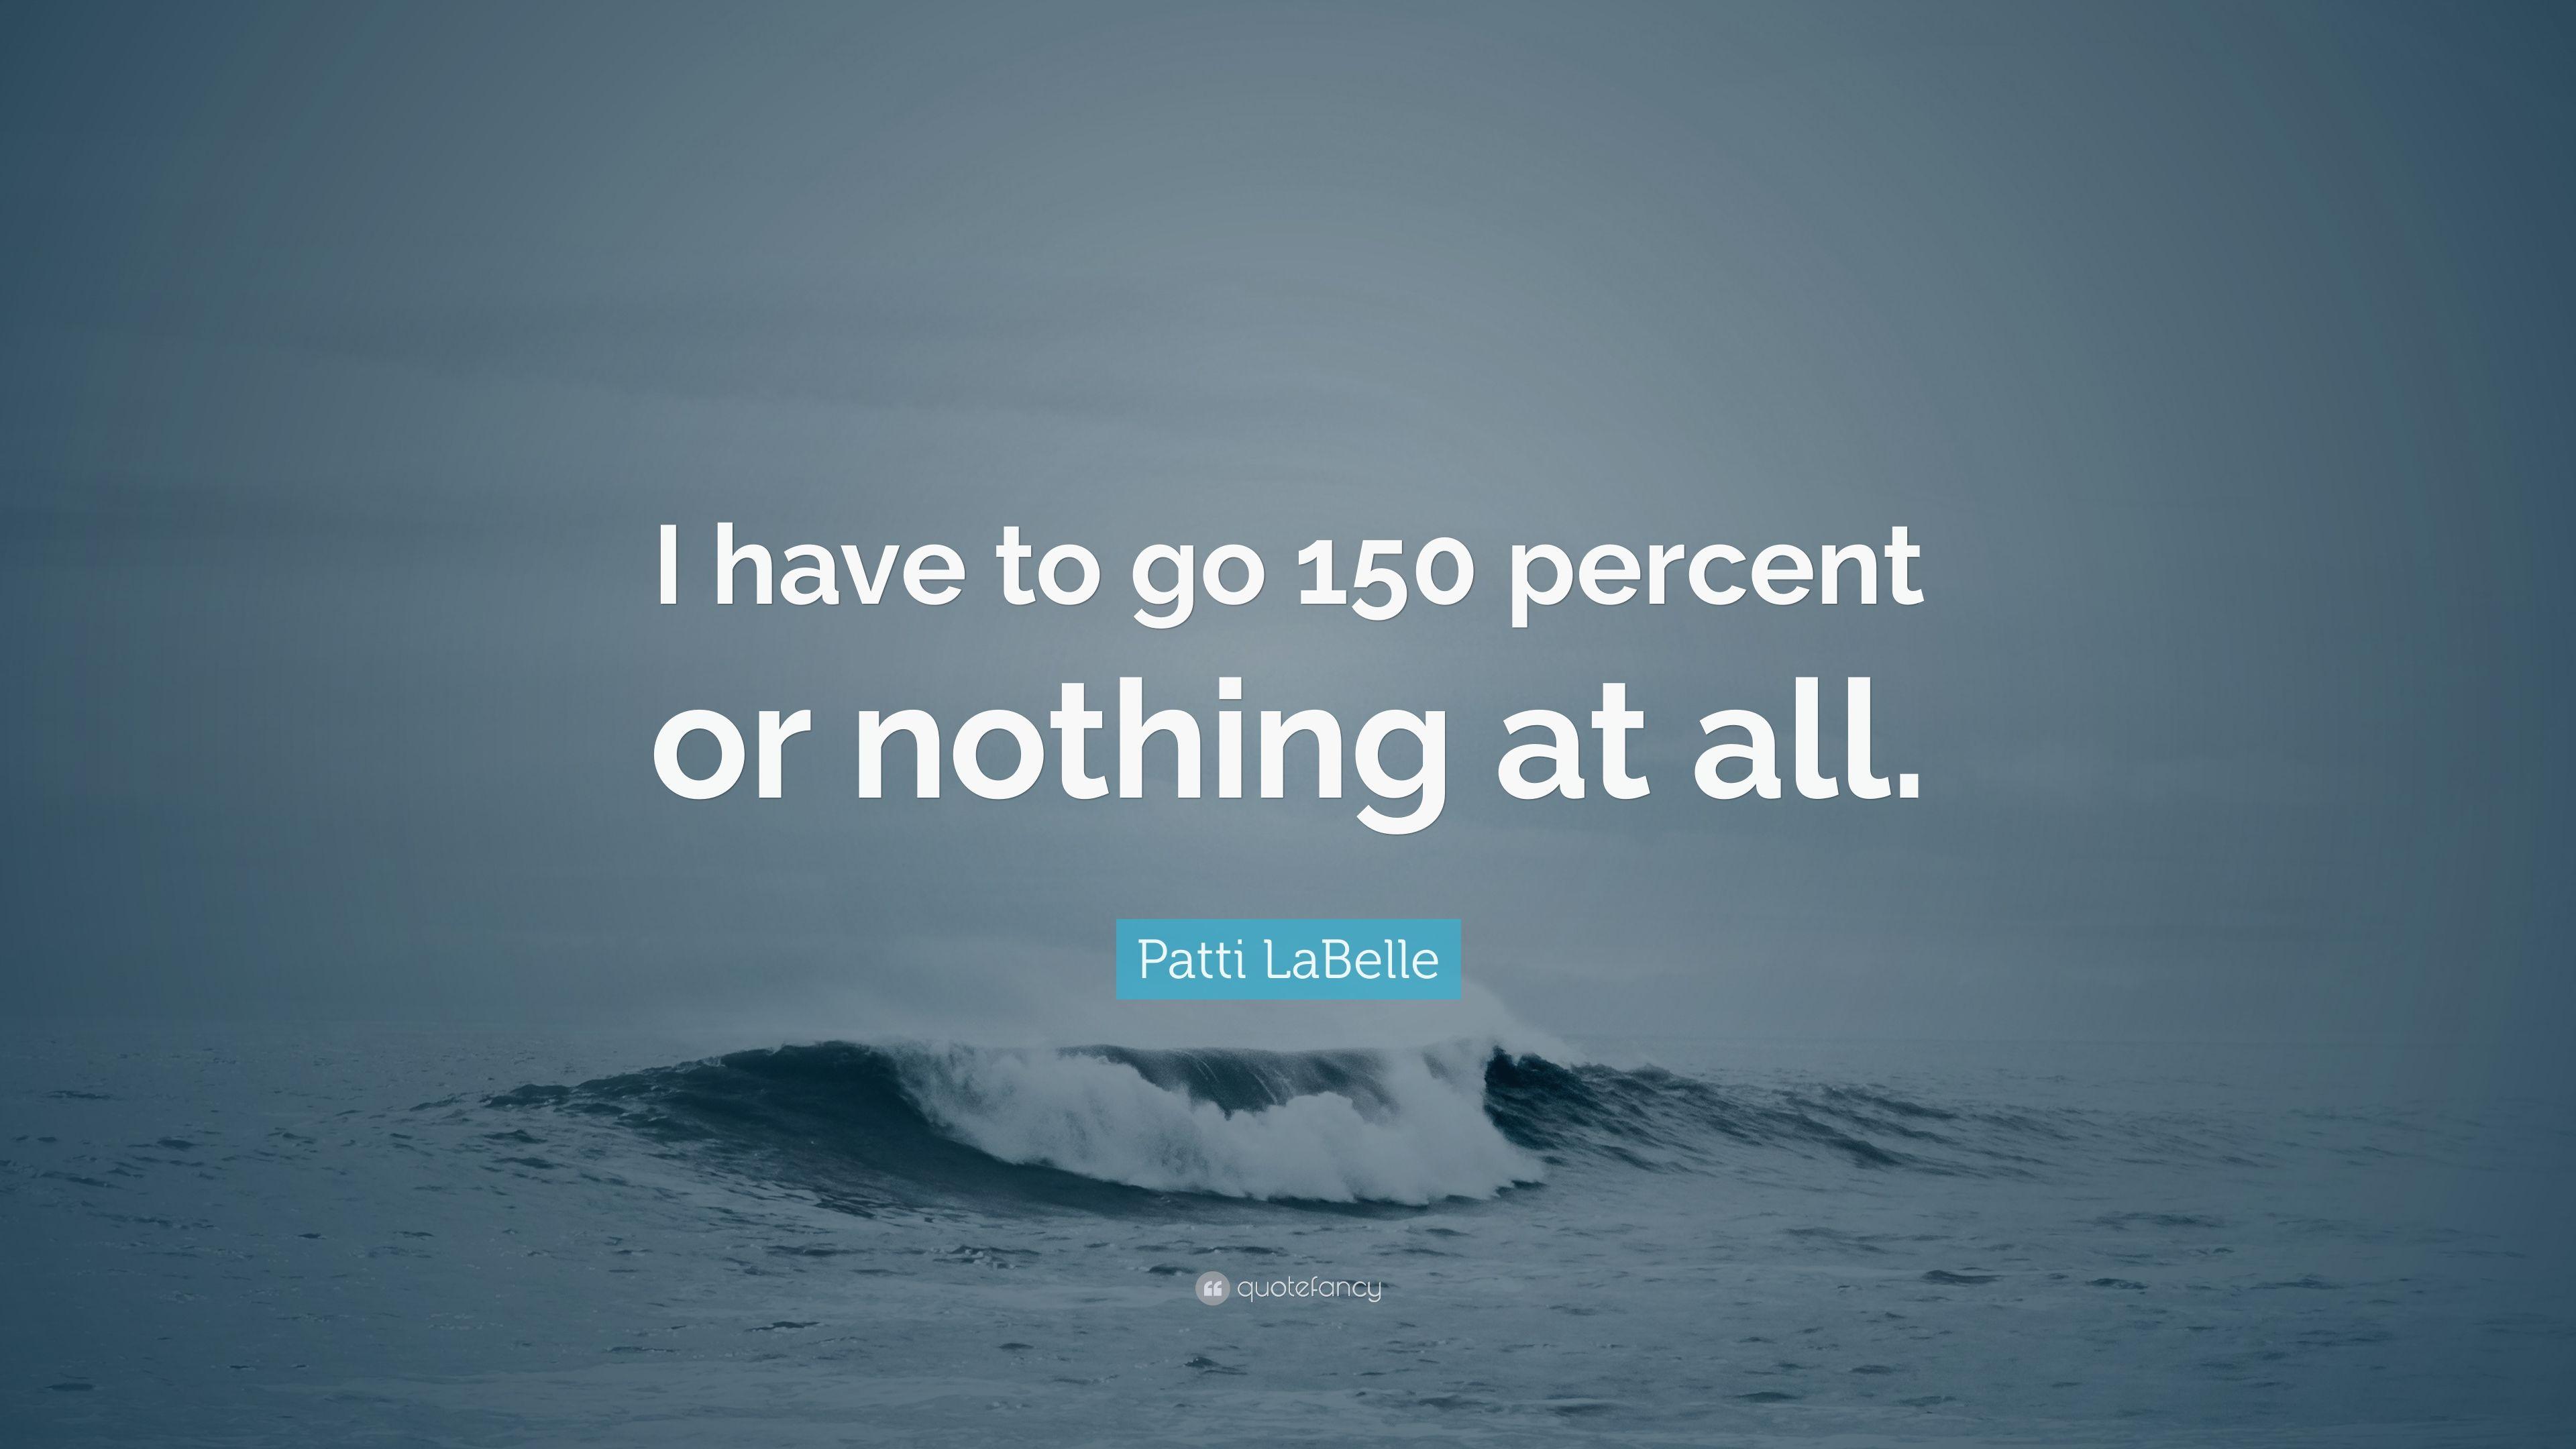 Patti LaBelle Quote: “I have to go 150 percent or nothing at all